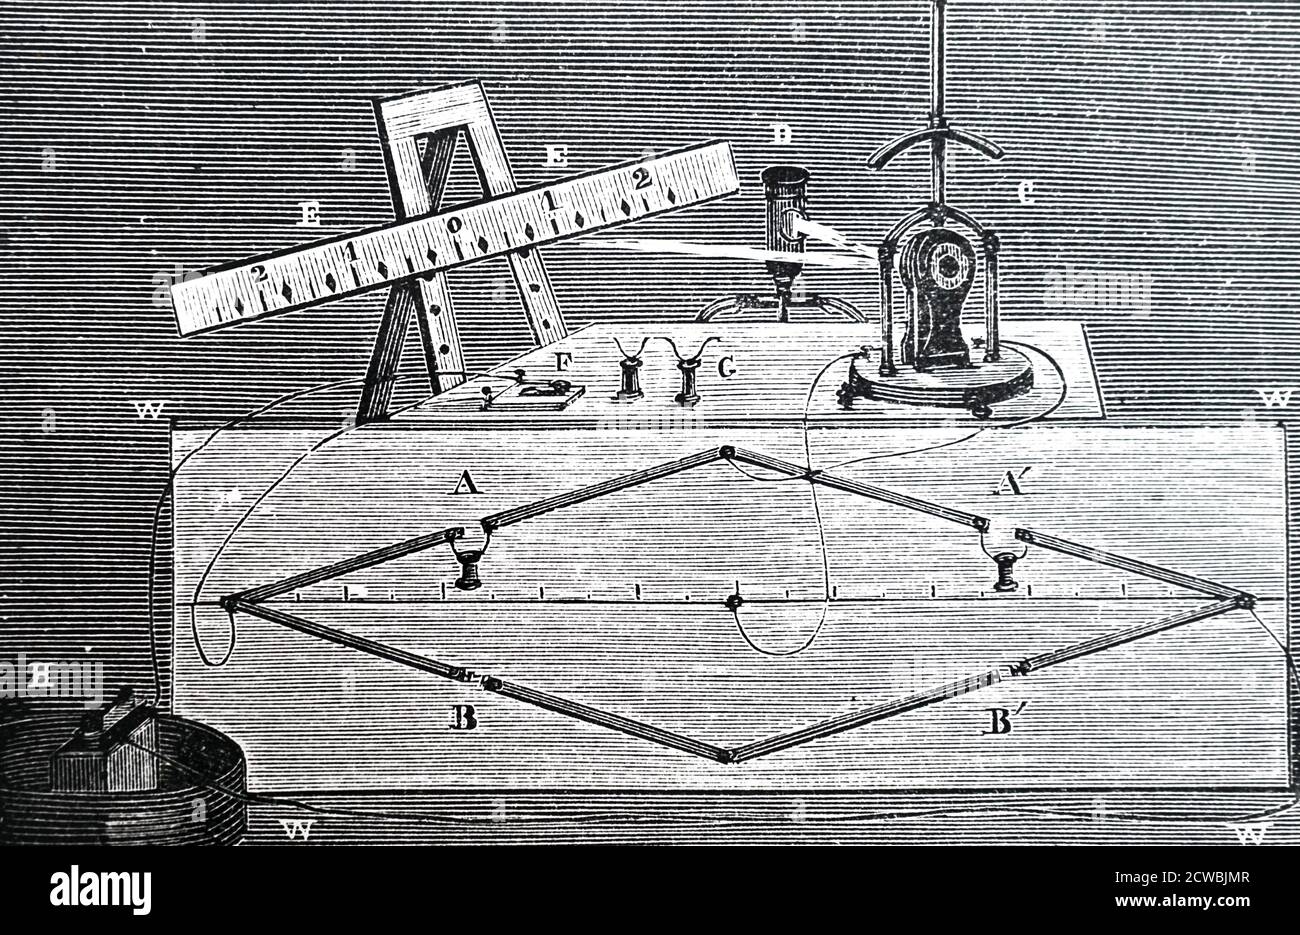 Engraving depicting Lord William Thomson Kelvin's galvanometer, showing how the light source at D is reflected off the mirror of the galvanometer on the scale E, E. The angle of the mirror, and so the measurement read off the scale, depends here on the current flowing through the Wheatstone bridge, A,A' ,B, B'. Stock Photo